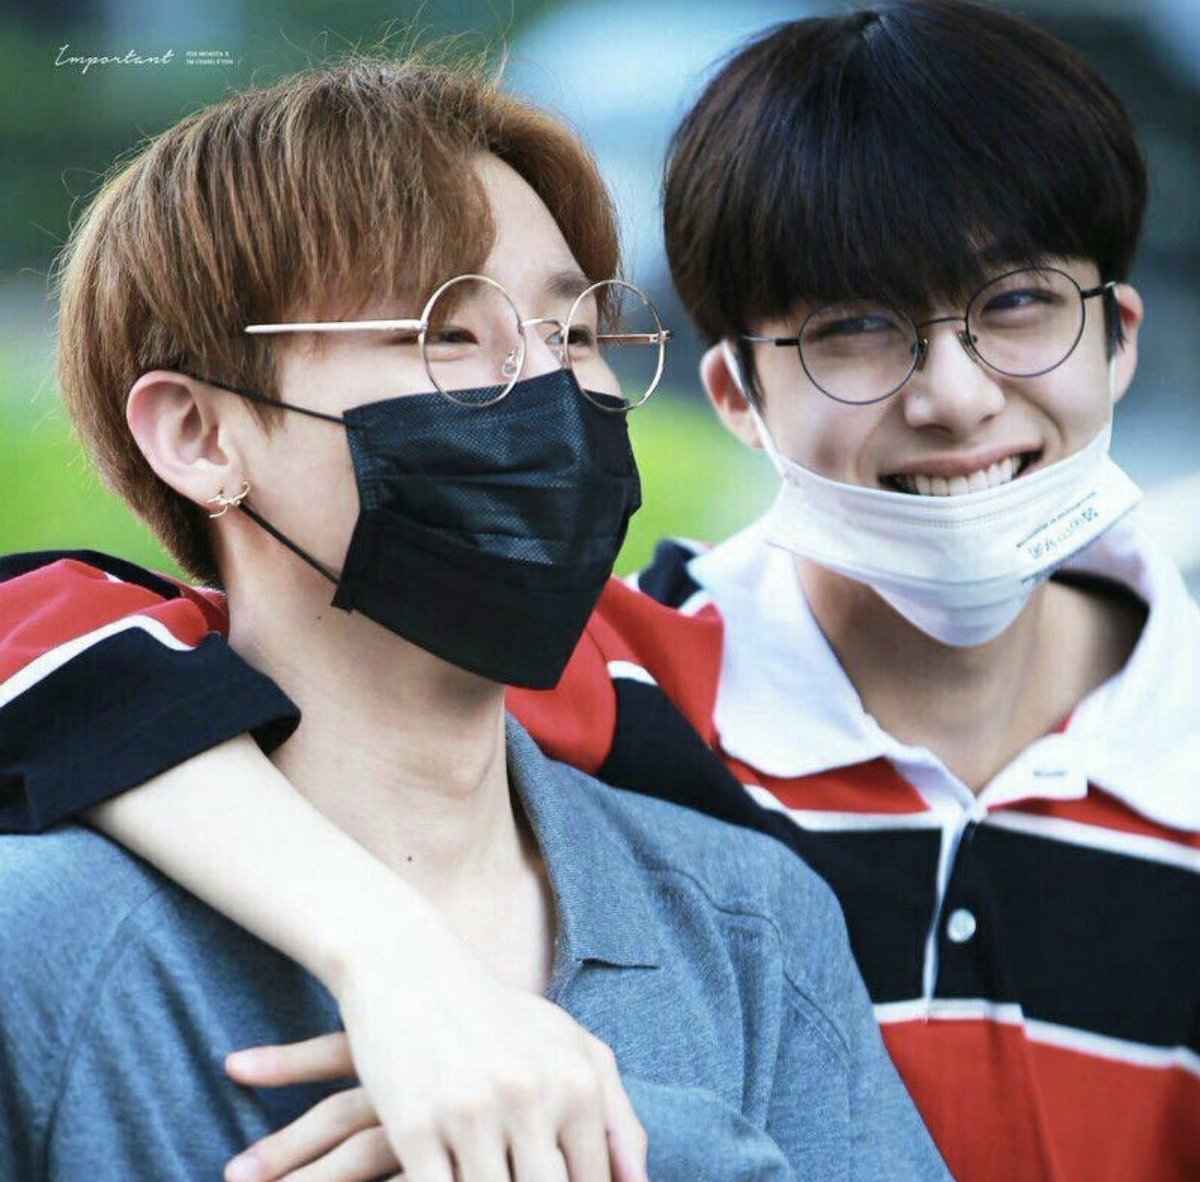 hyungkyun- changkyuns ‘favourite’ hyung- i feel like hyungwon is changkyuns rap student - ‘these days he’s really like my family and my brother’ -ck